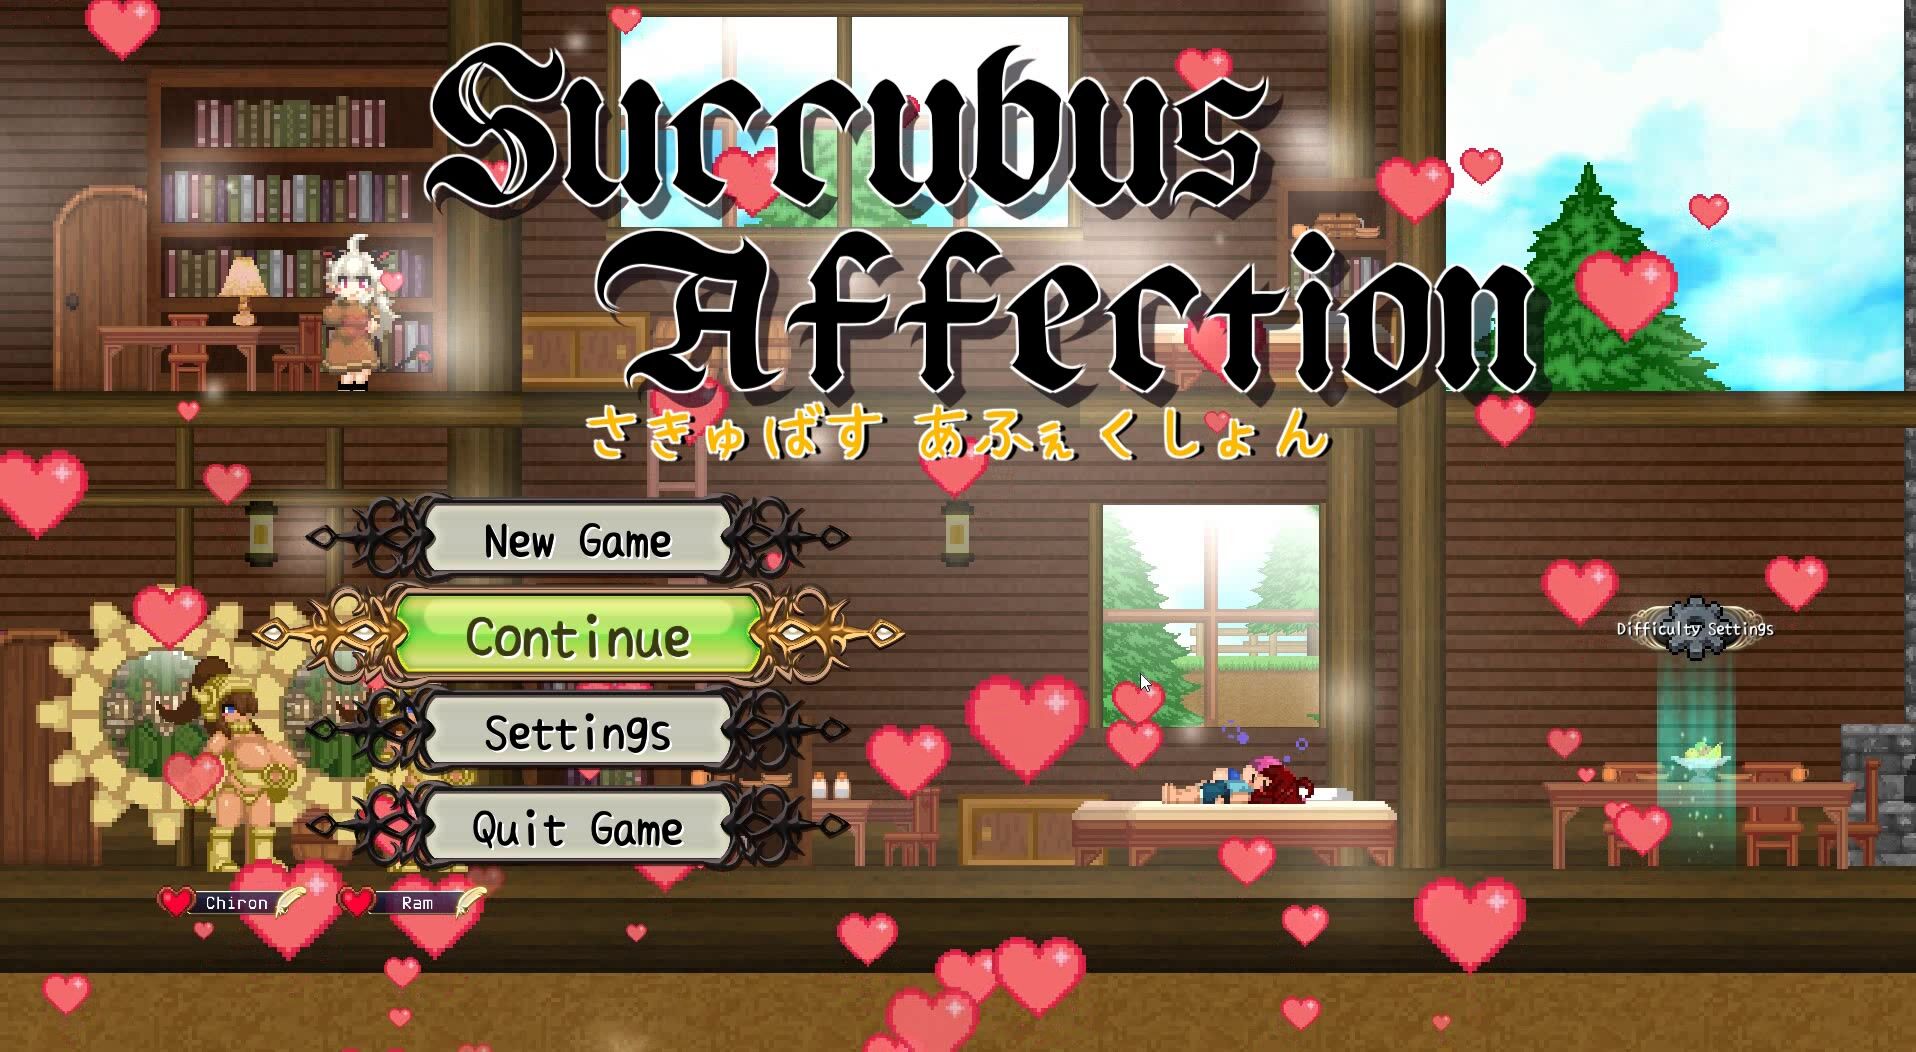 Succubus affection gallery